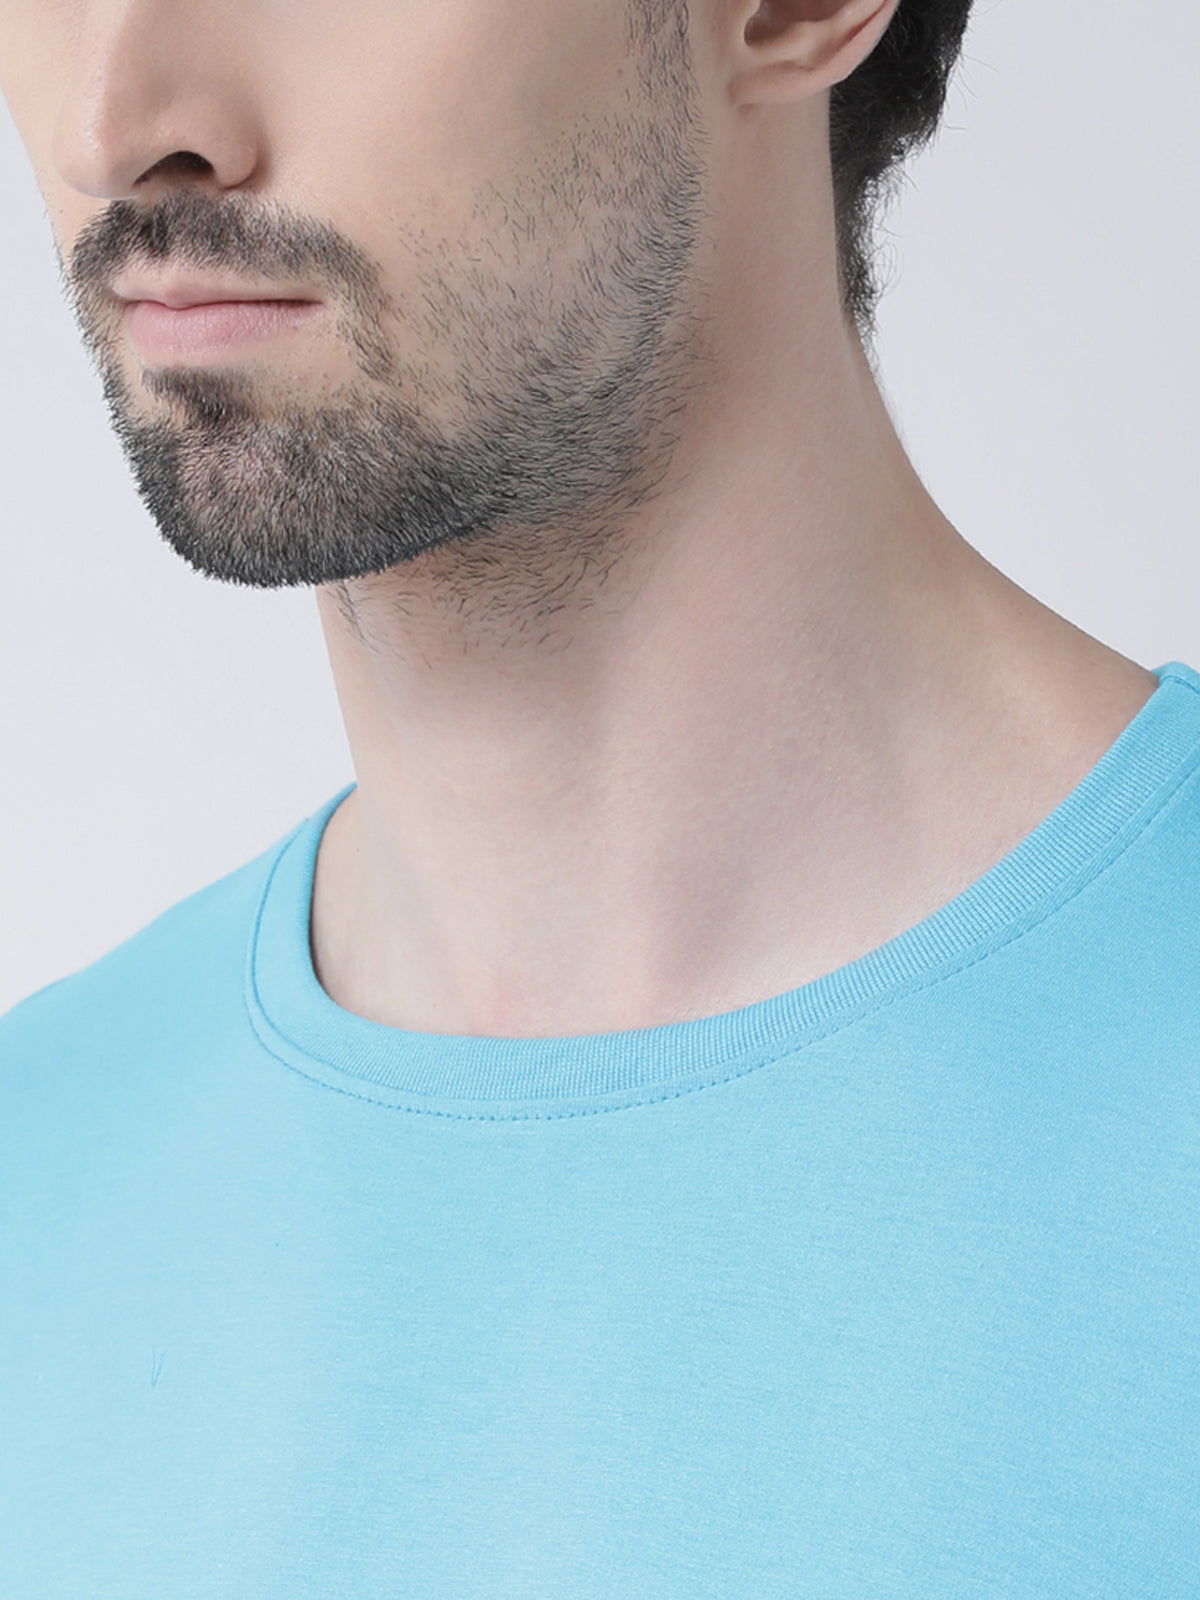 Men Solid Round Neck Full Sleeve T-shirt - Friskers